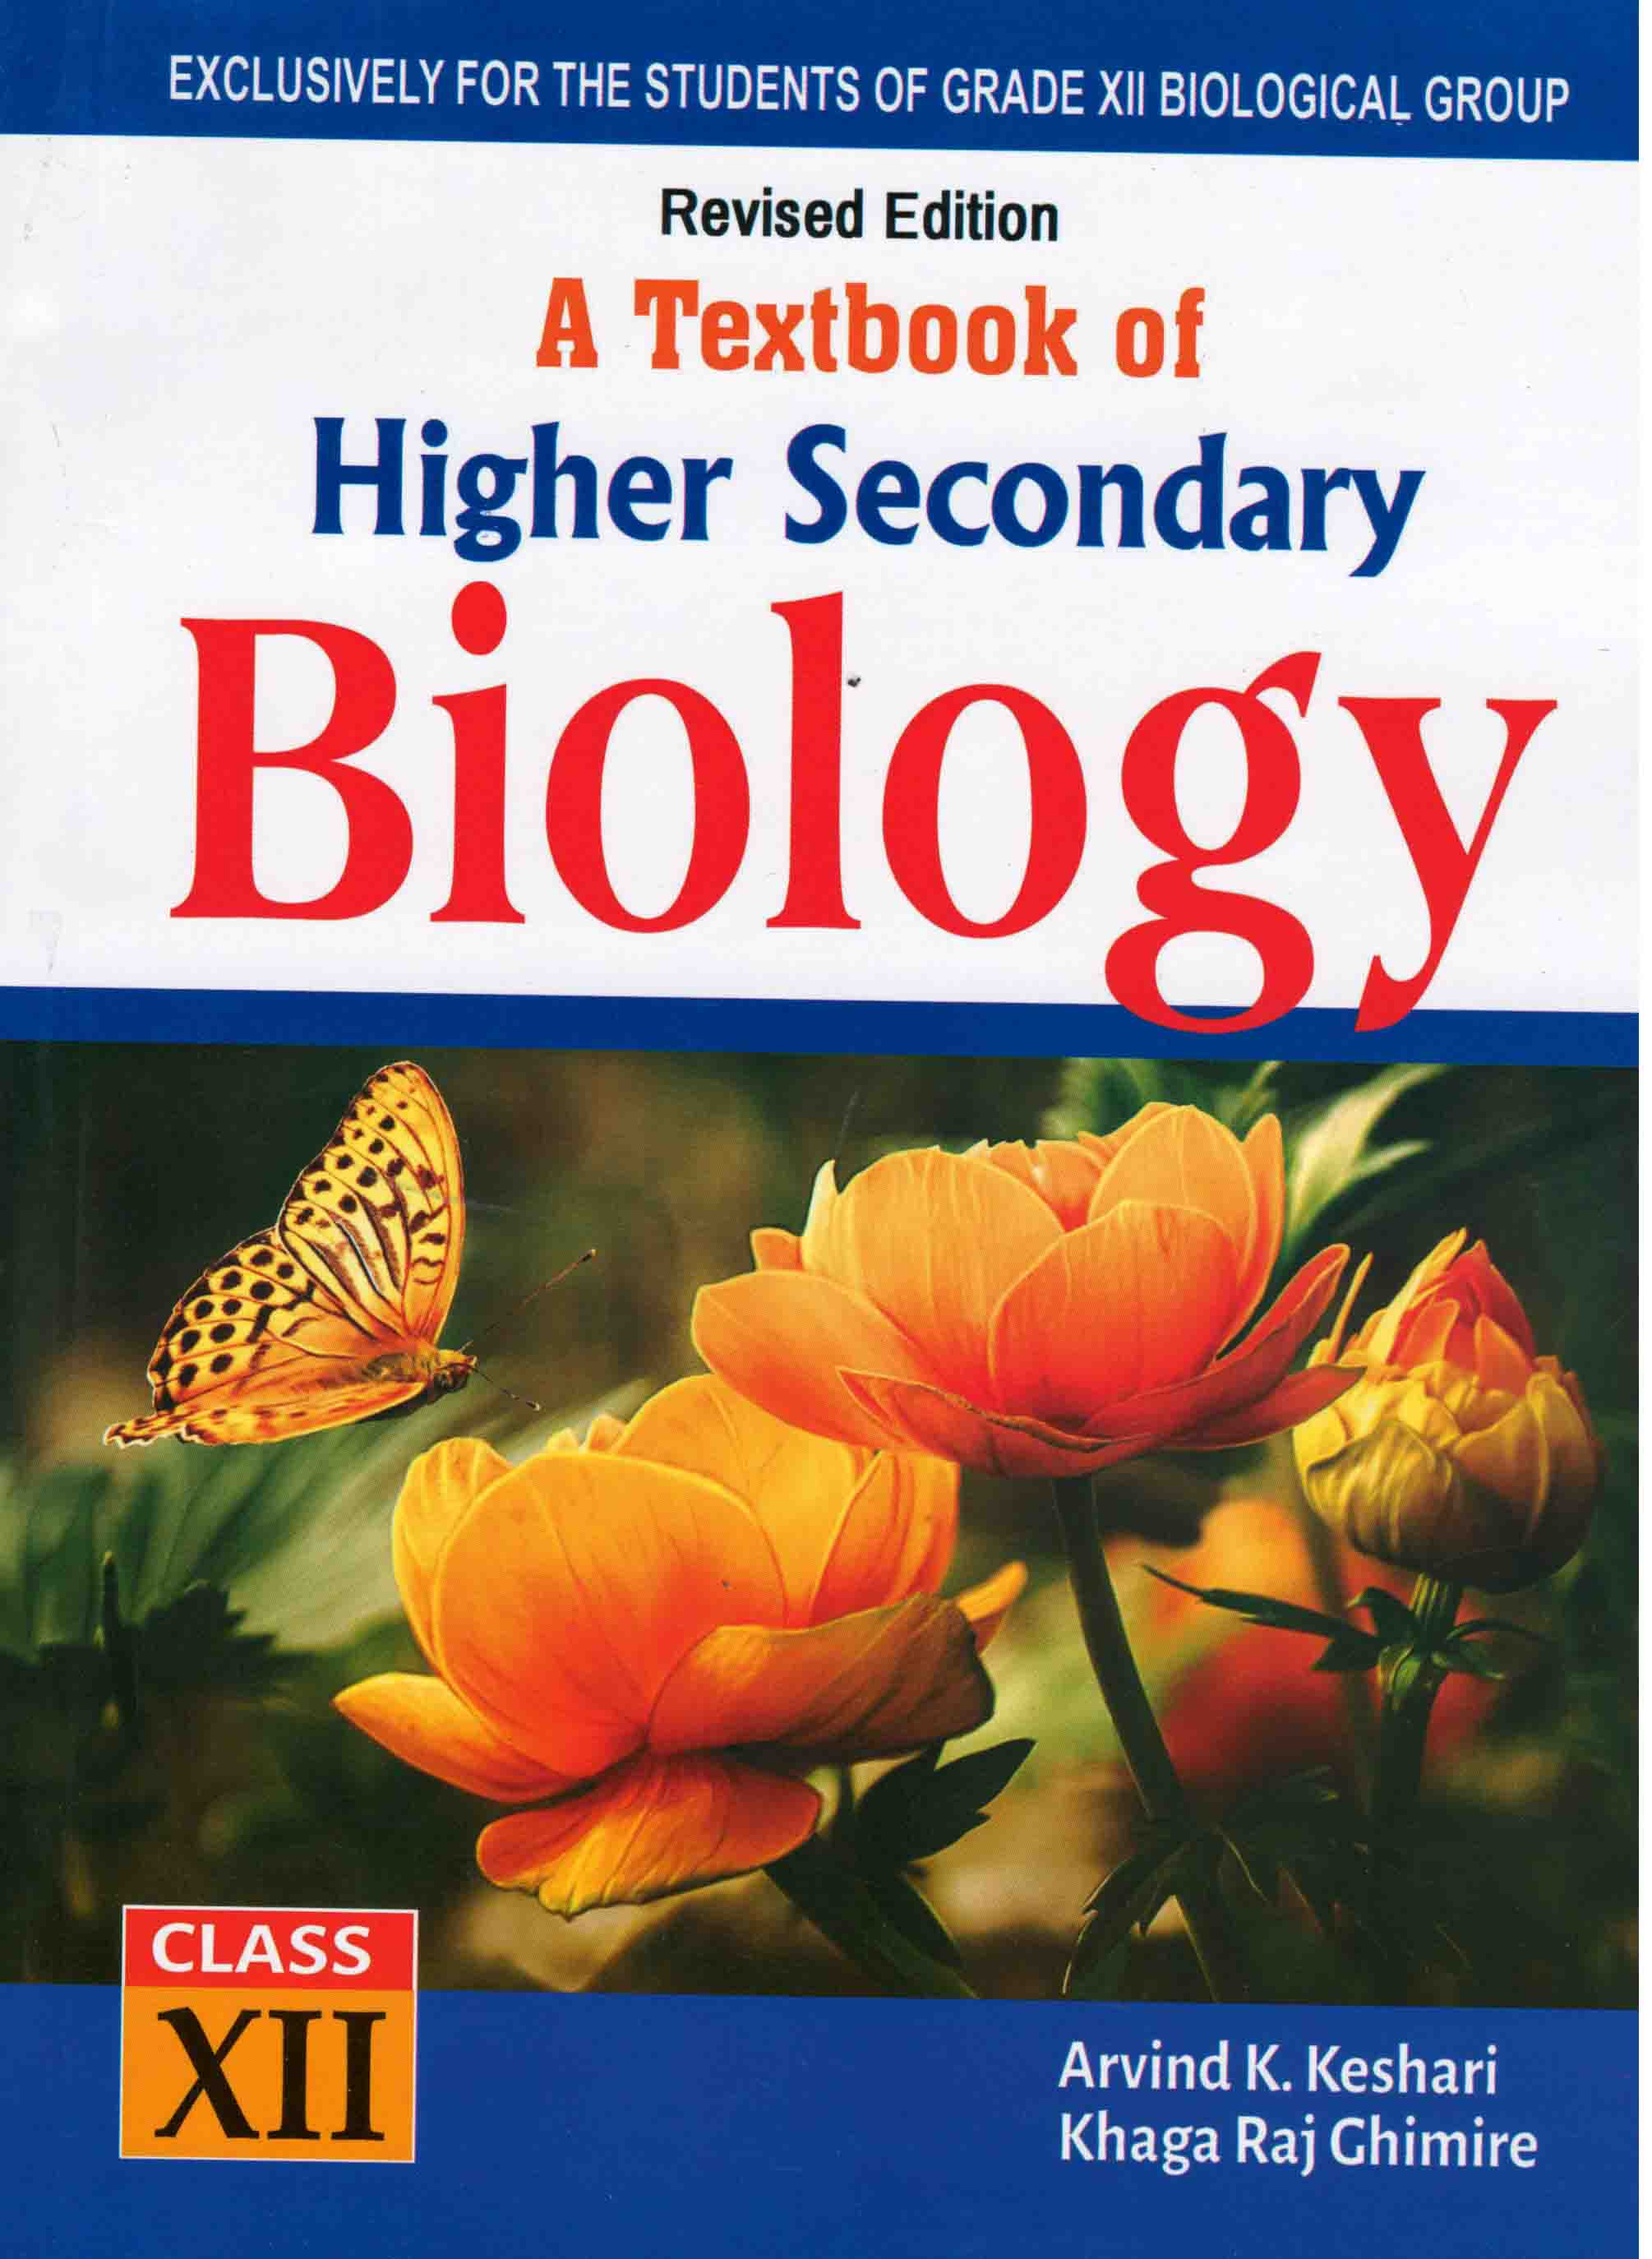 Text Book of Higher Secondary Biology  - XII